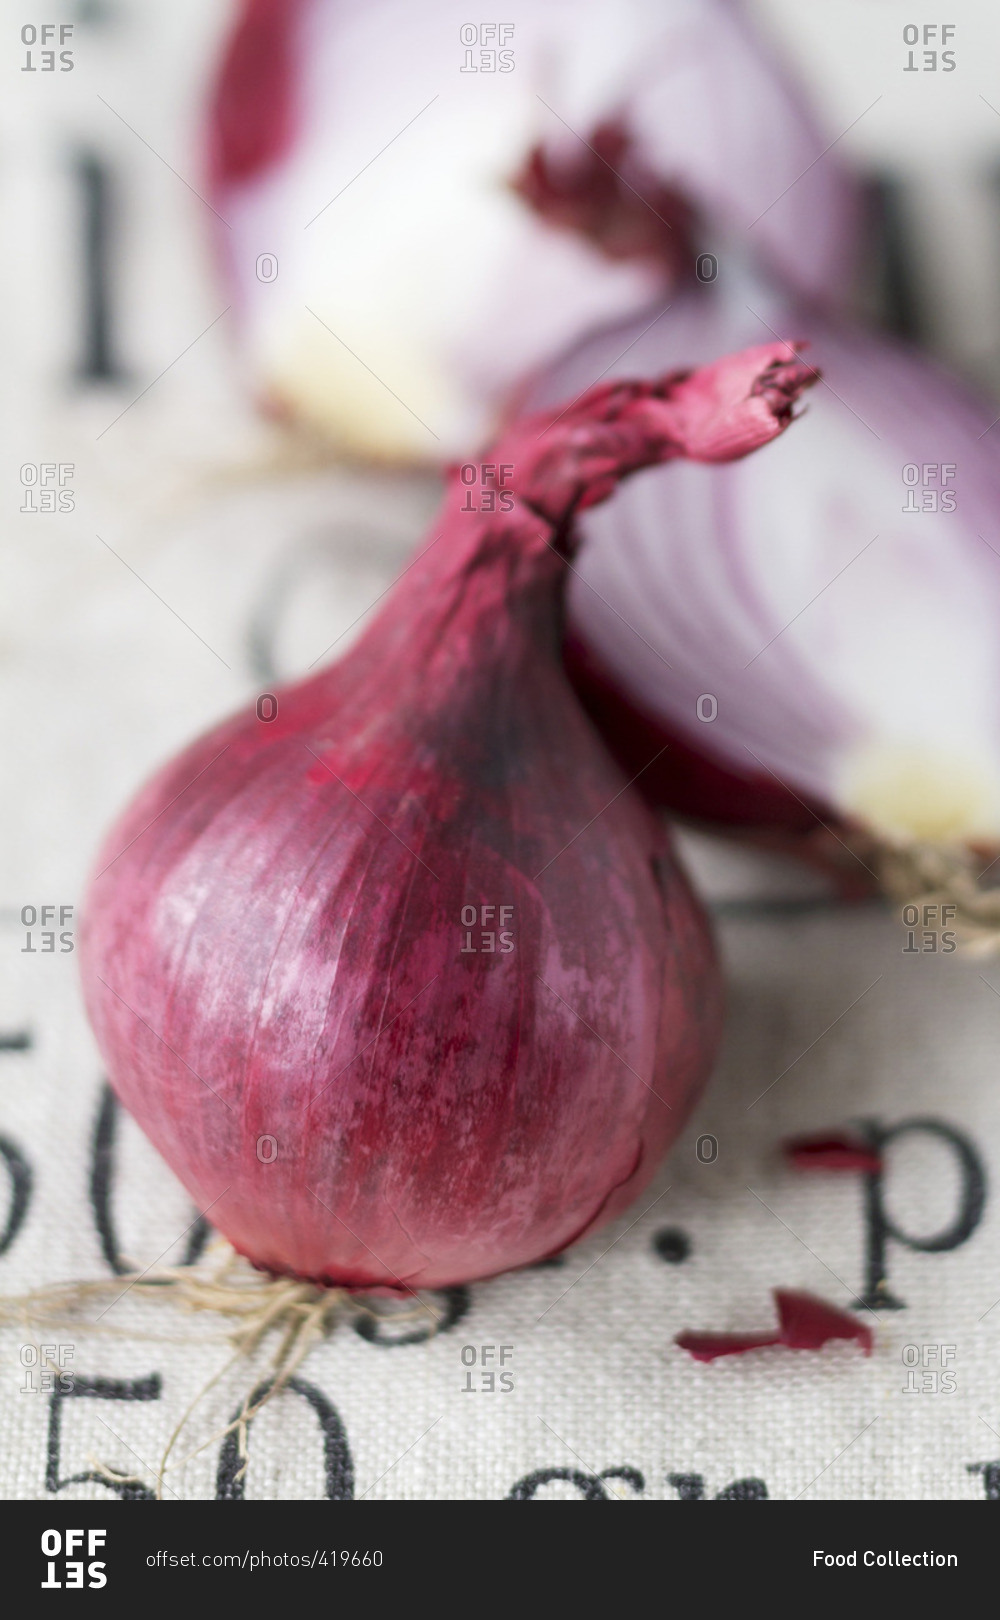 A halved and a whole red onion